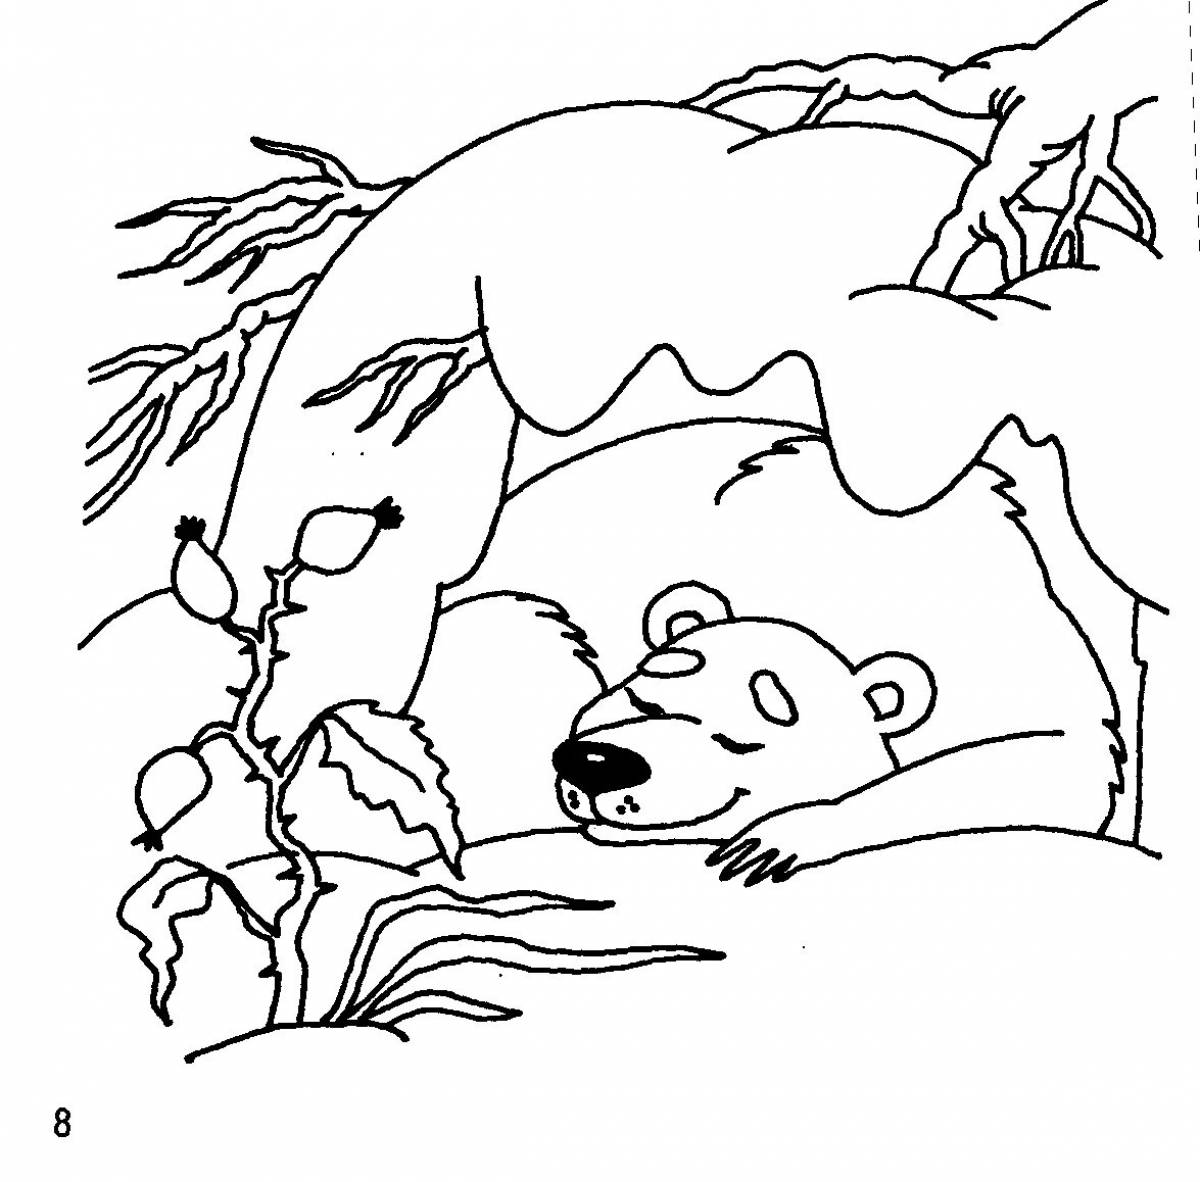 Charming bear den coloring book for kids 2-3 years old